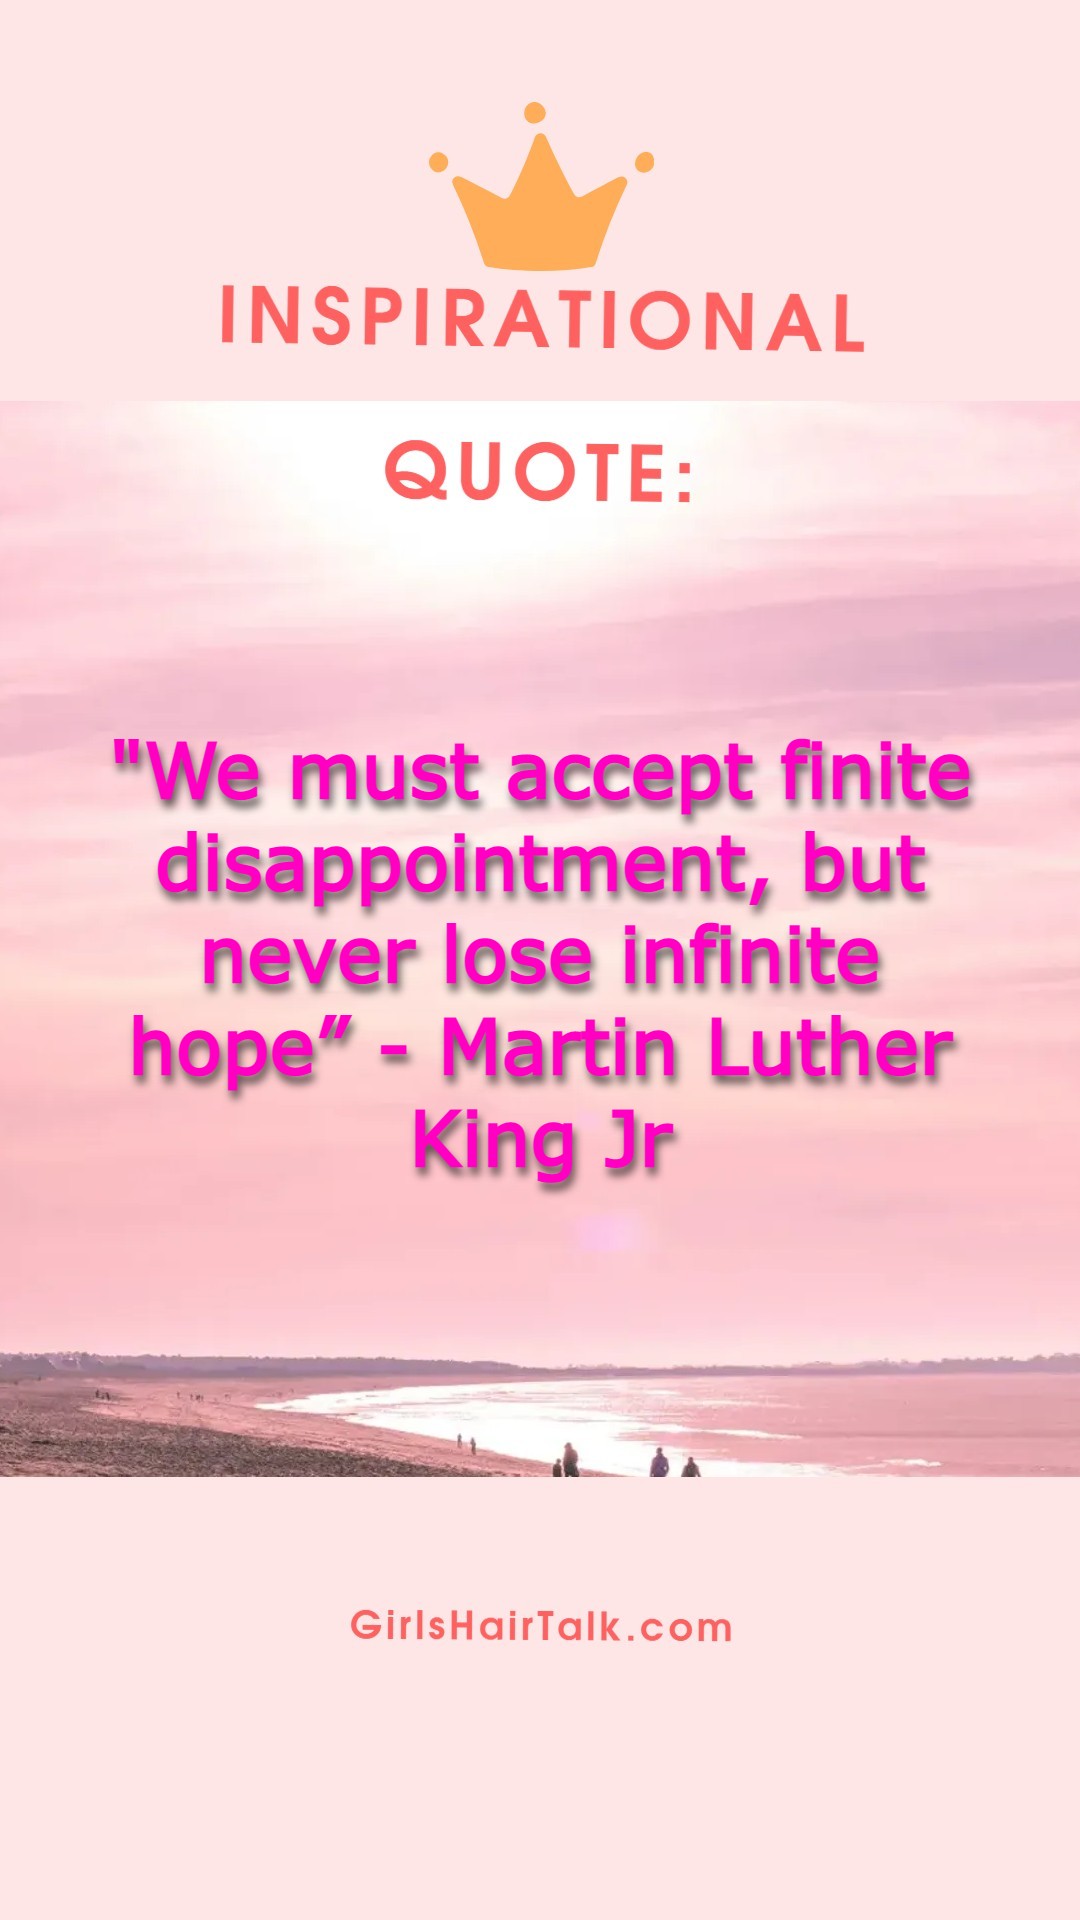 Martin Luther King Jr cancer quotes